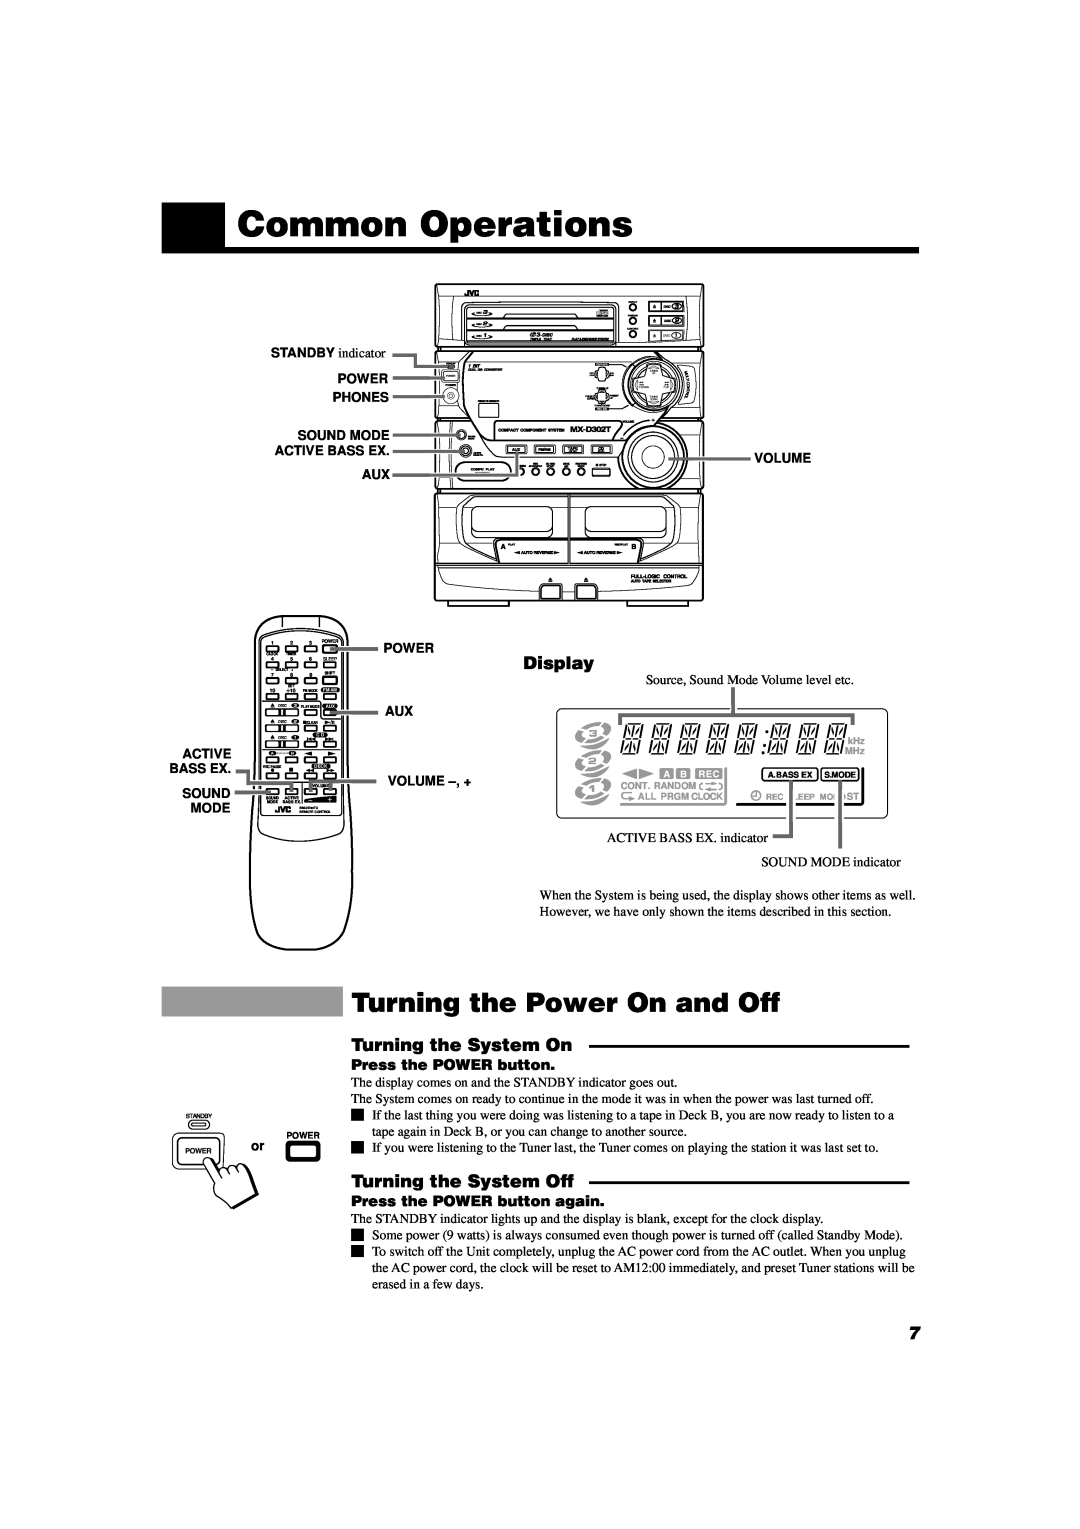 JVC SP-D302 manual Common Operations, Turning the Power On and Off, Press the POWER button again, Aux Volume -,+ 